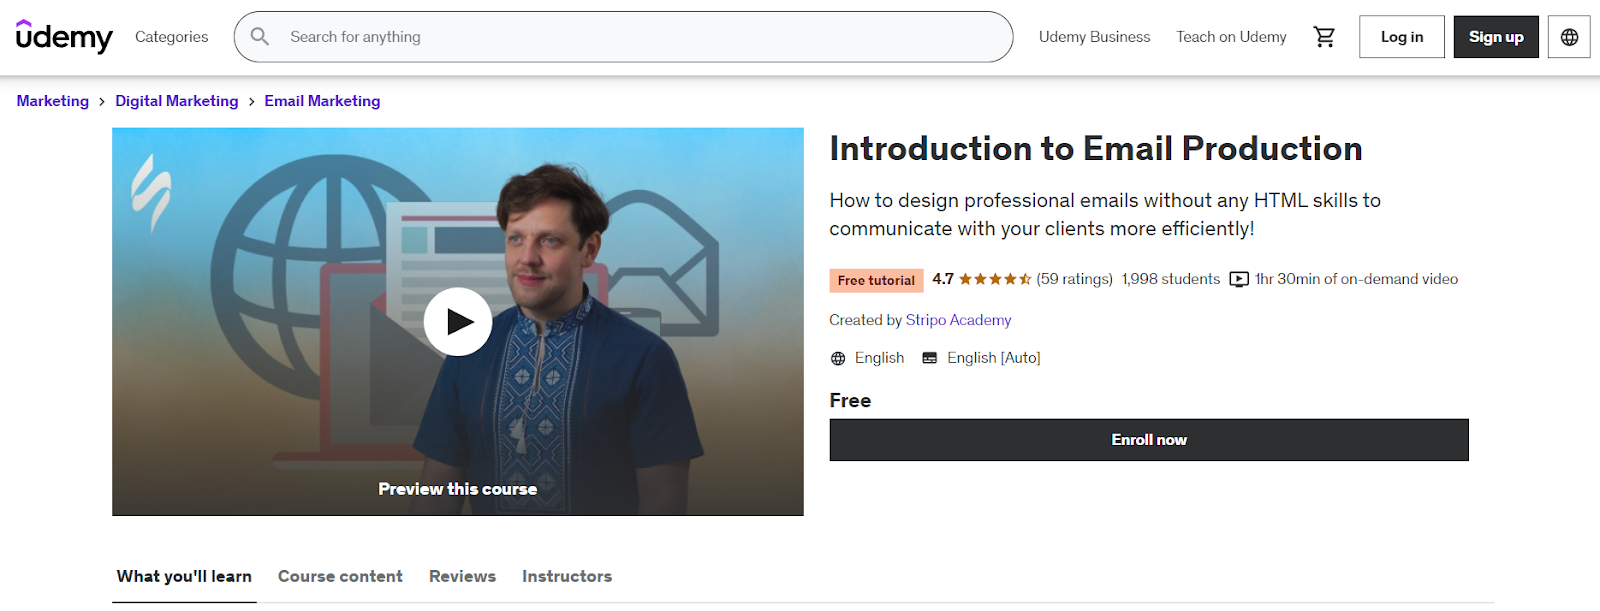 Introduction to email production by Stripo _ Udemy